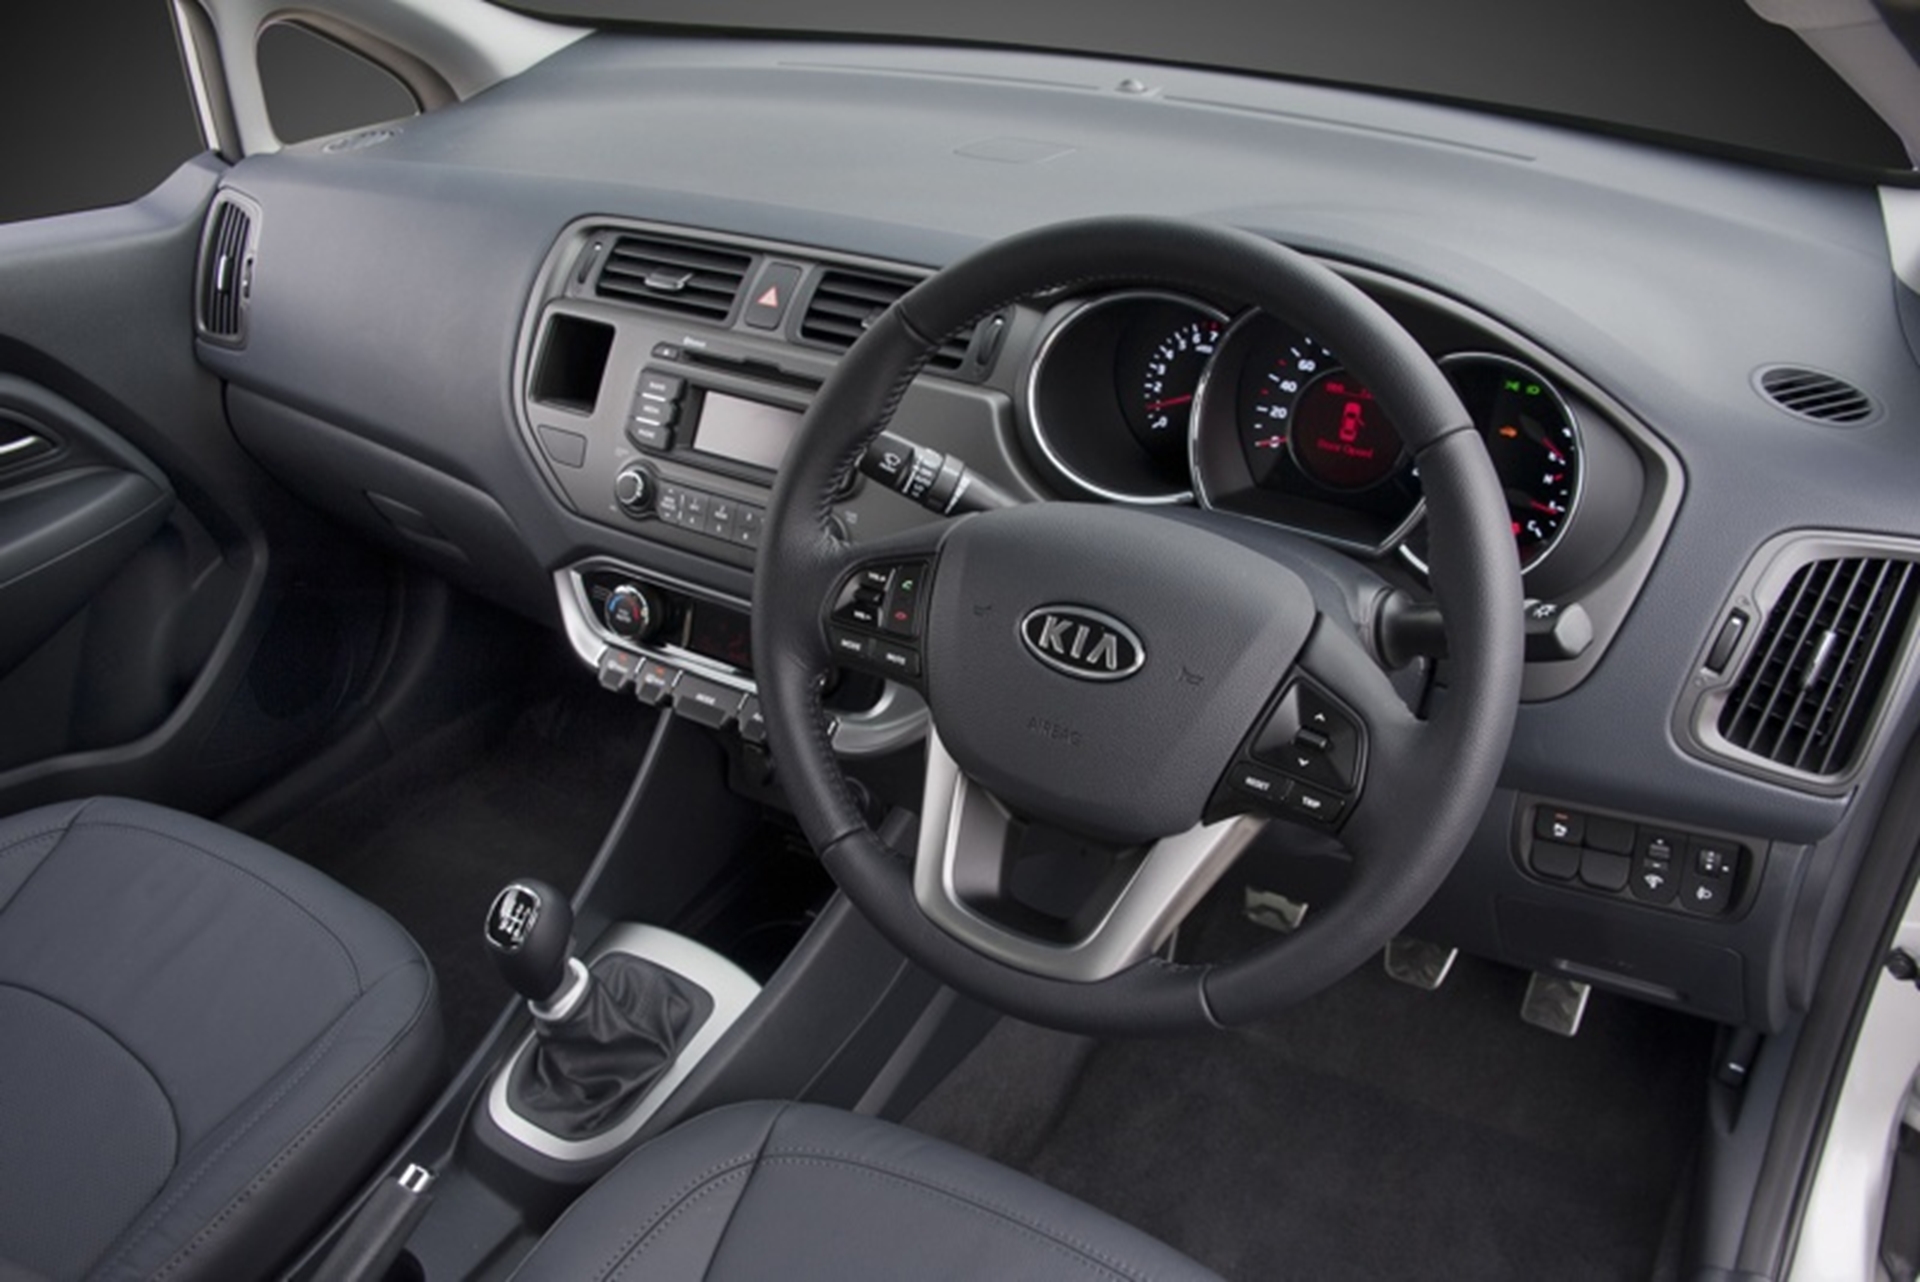 Kia Motors South Africa: KIA RIO Comprehensive active and passive safety systems